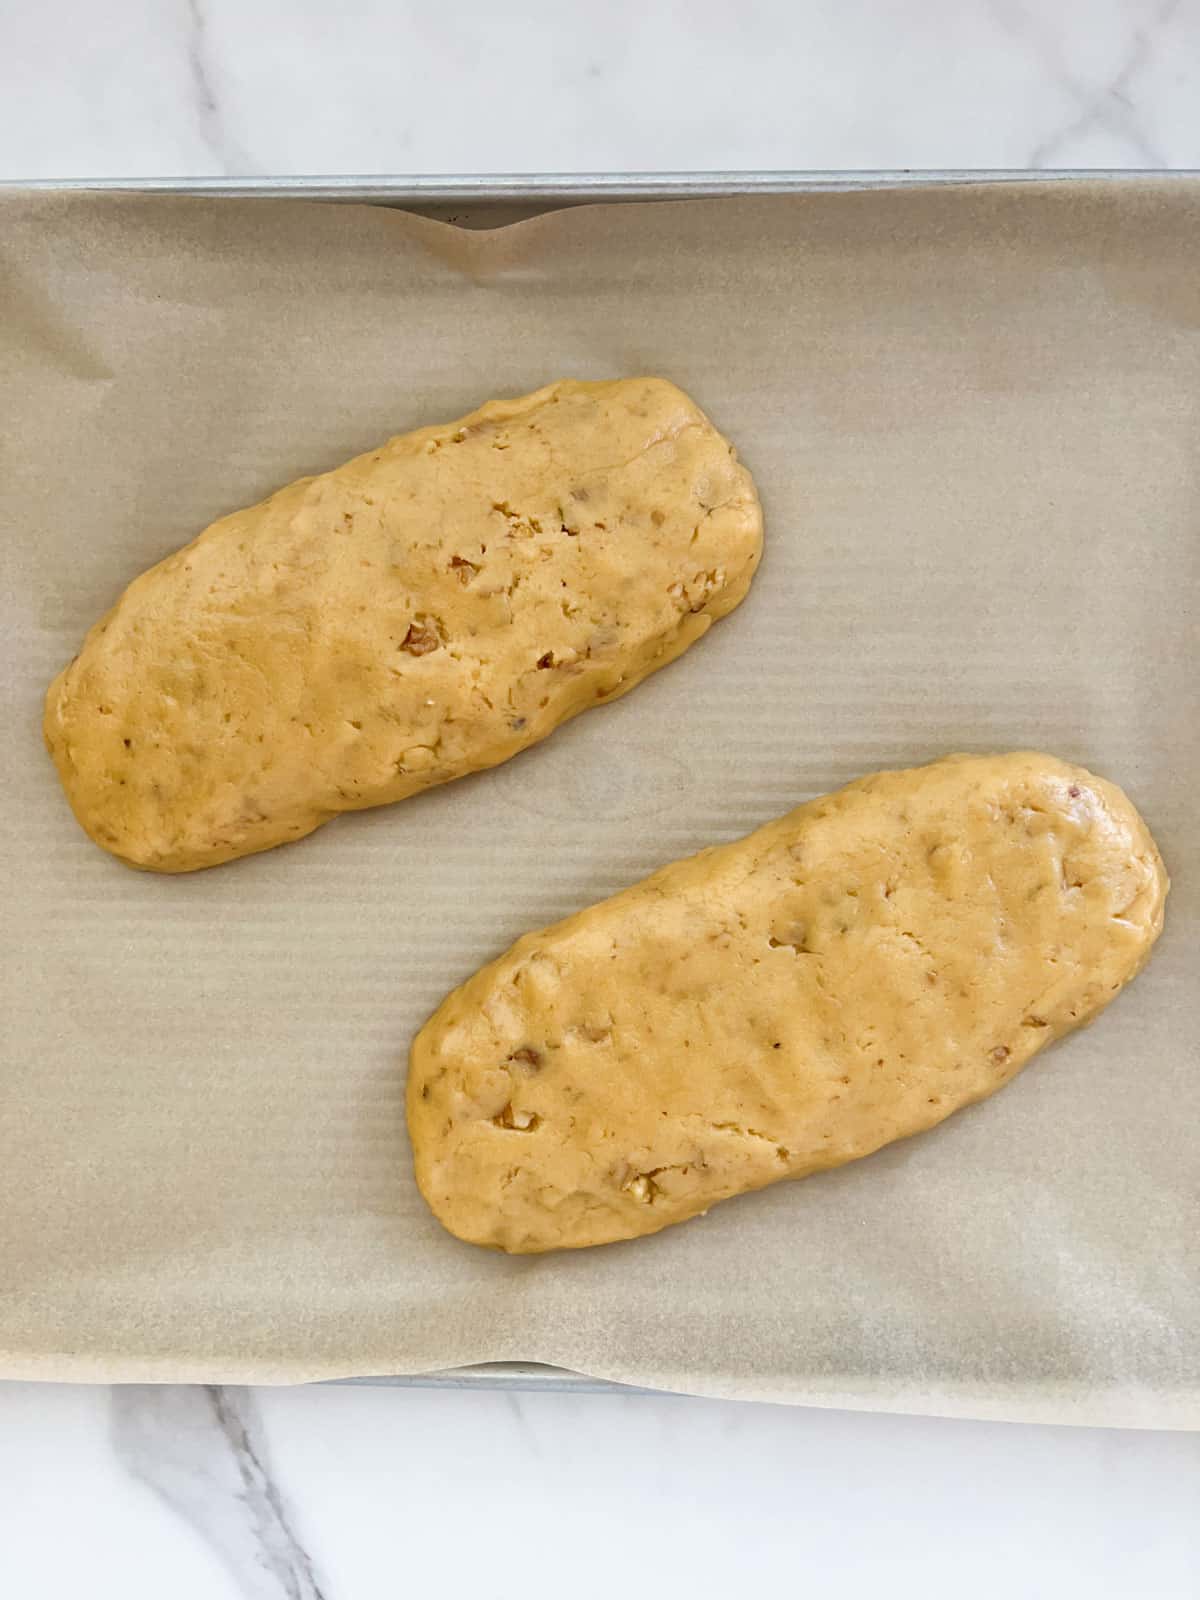 Two logs of biscotti dough placed diagonally on a metal baking sheet lined with parchment paper.